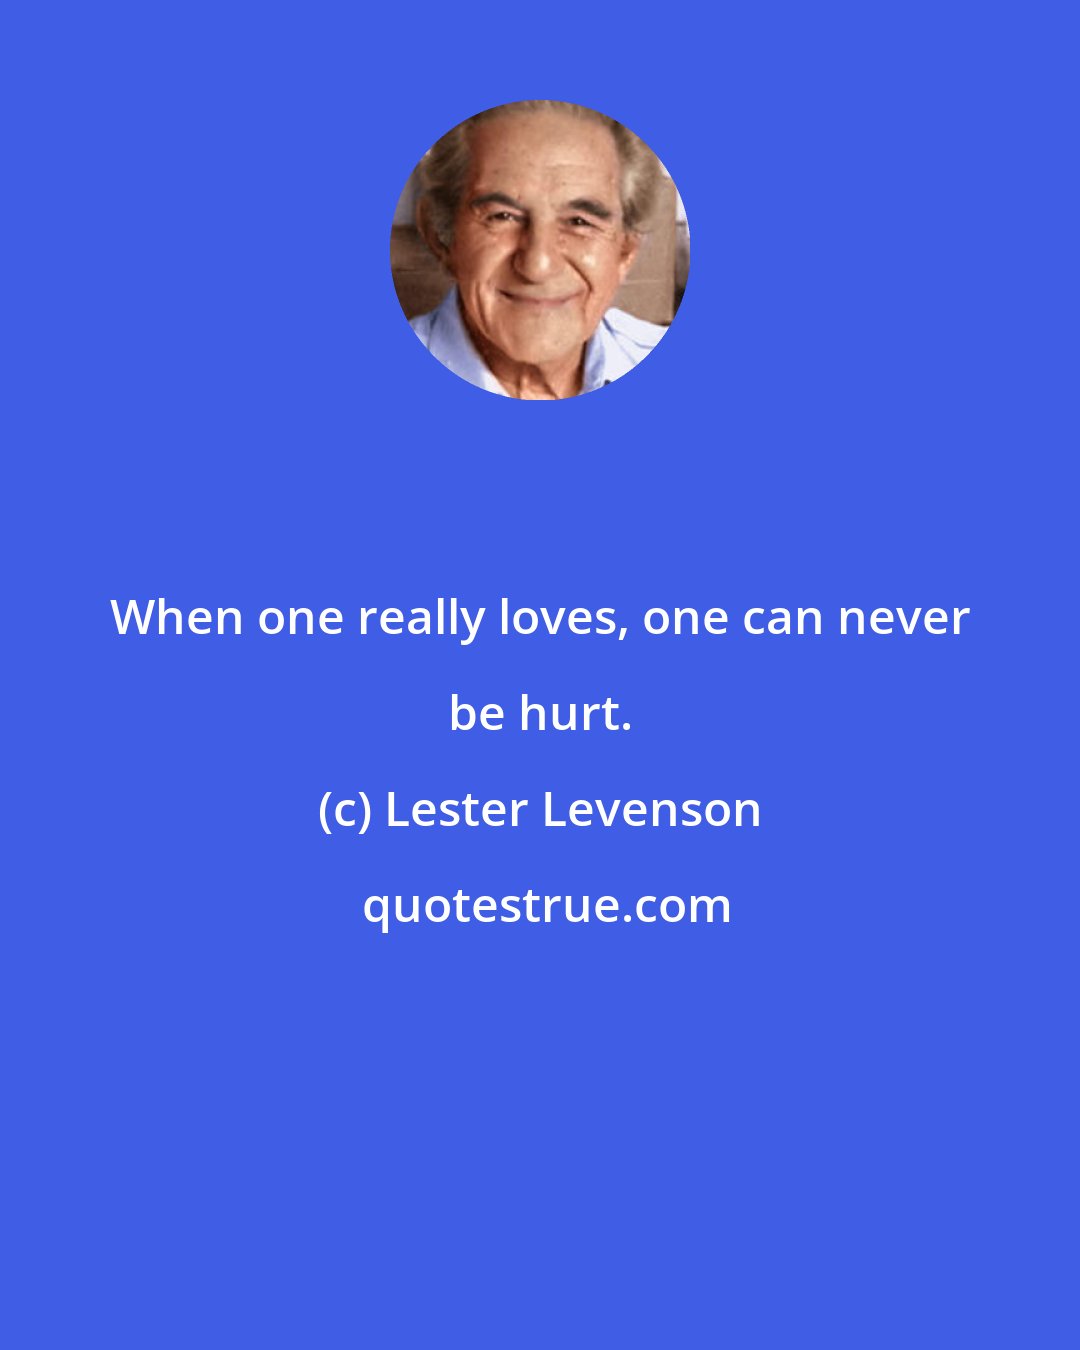 Lester Levenson: When one really loves, one can never be hurt.